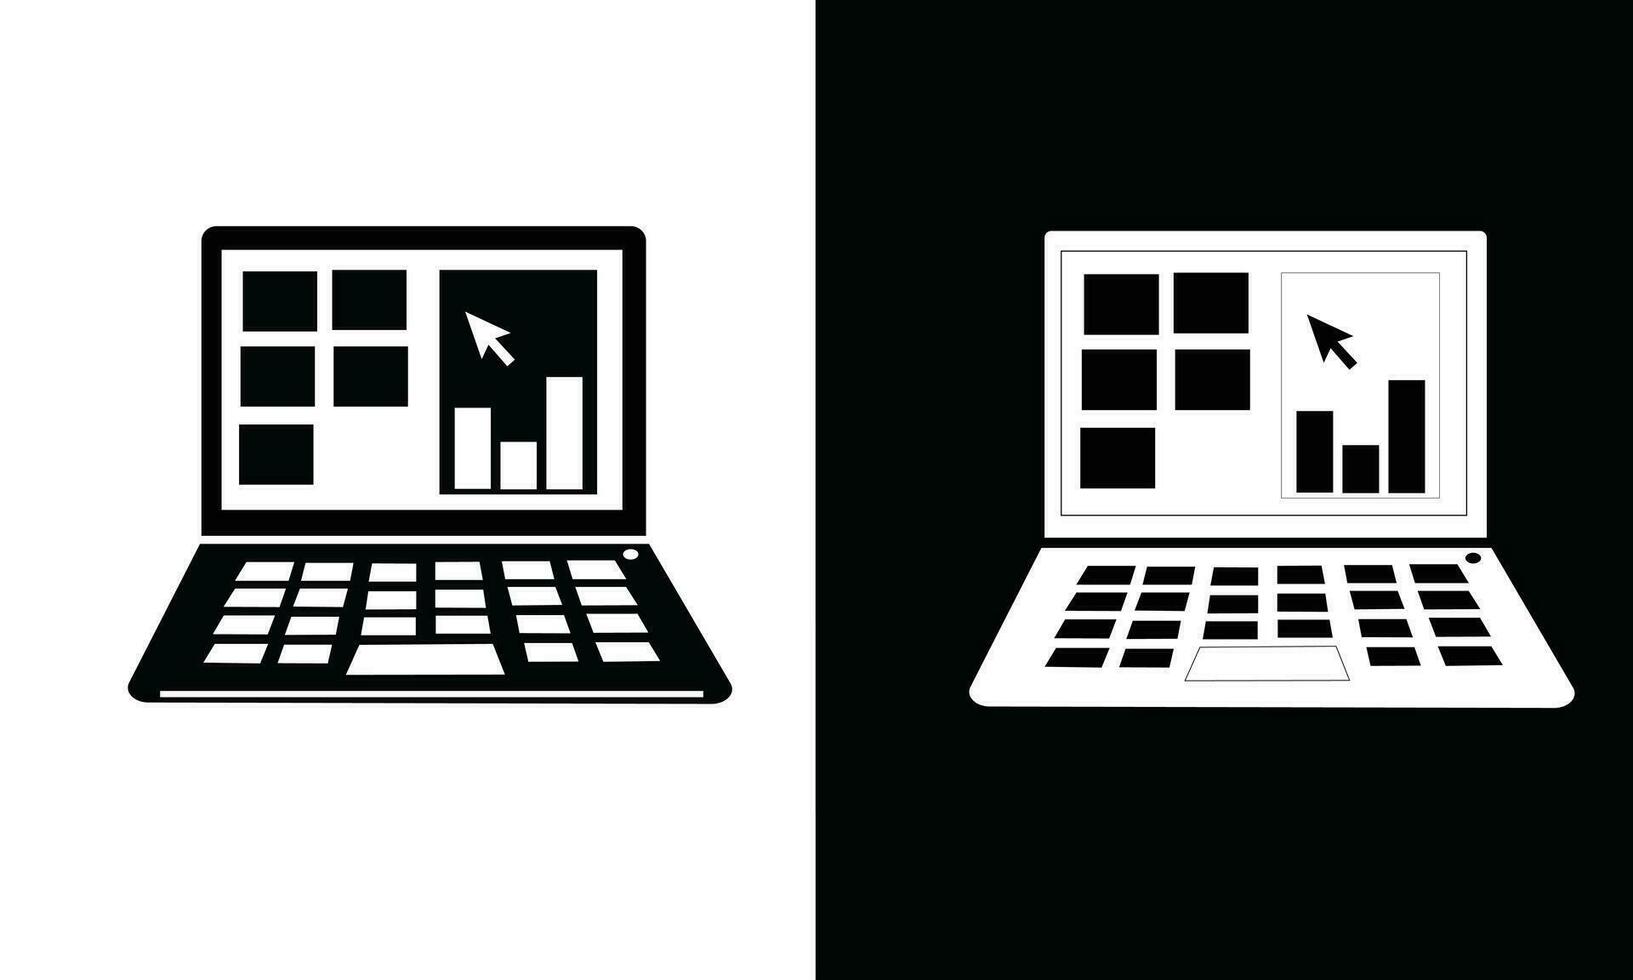 Laptop icon vector. Laptop vector in silhouette style. School supplies icon vector. Back to school concept. Learning and education icon. Flat vector in black and white.